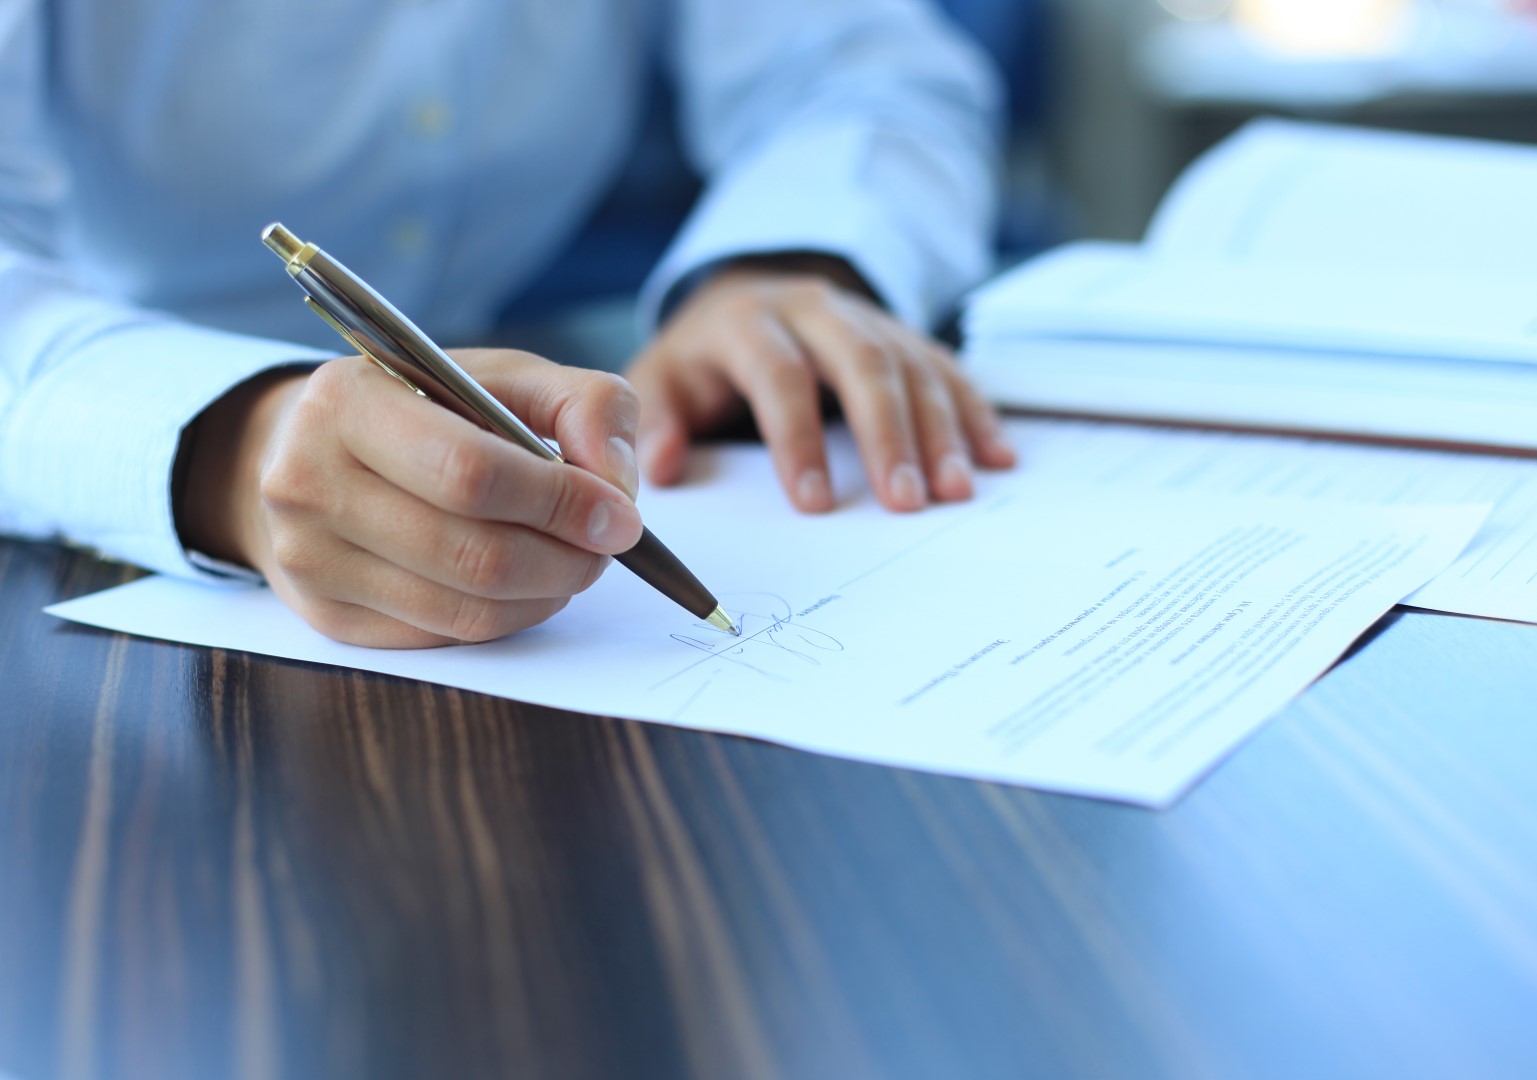 signing a legal contract